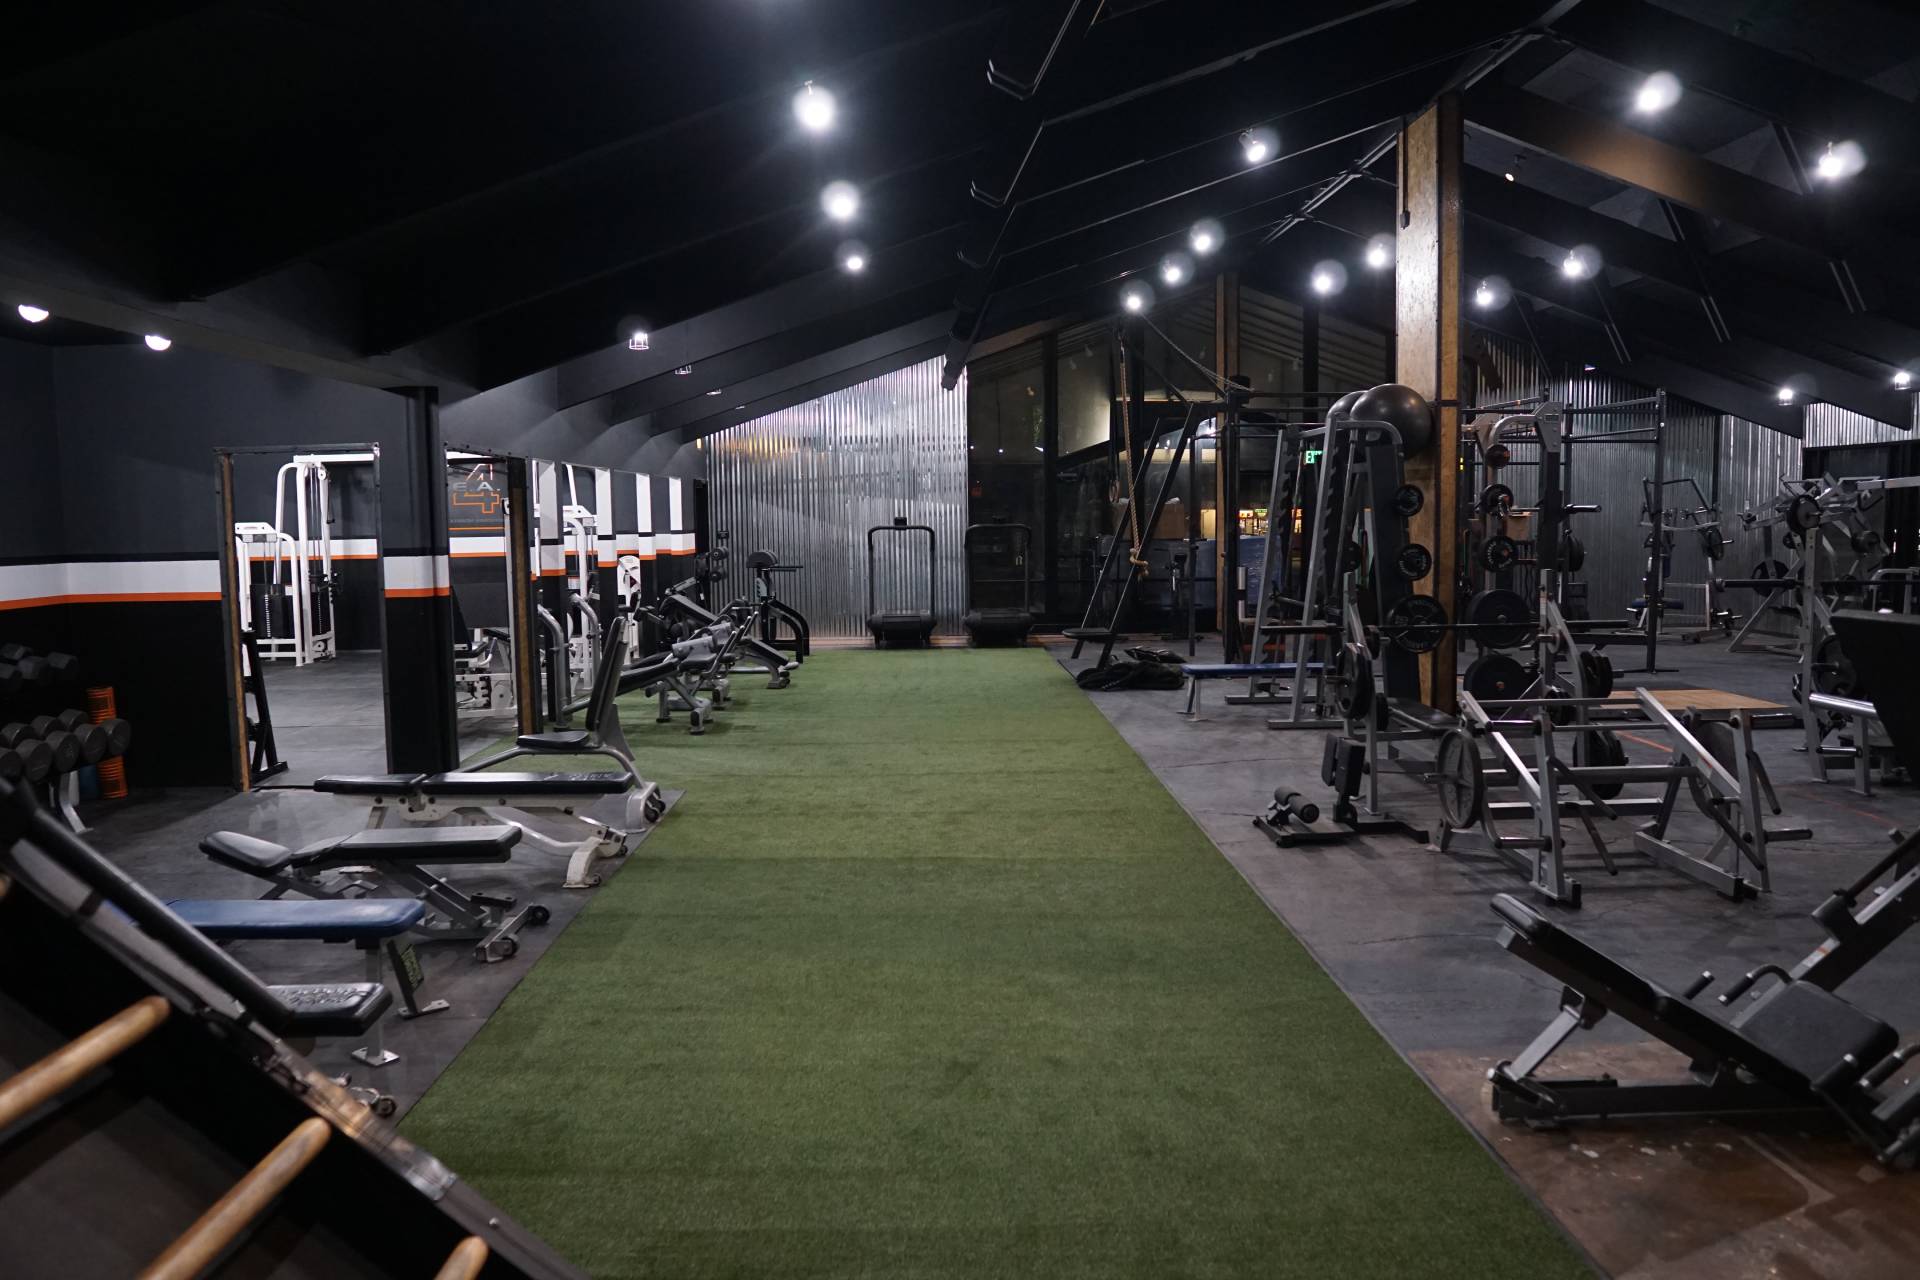 Looking for the Best Workout in Goleta? Look No Further than COAC.